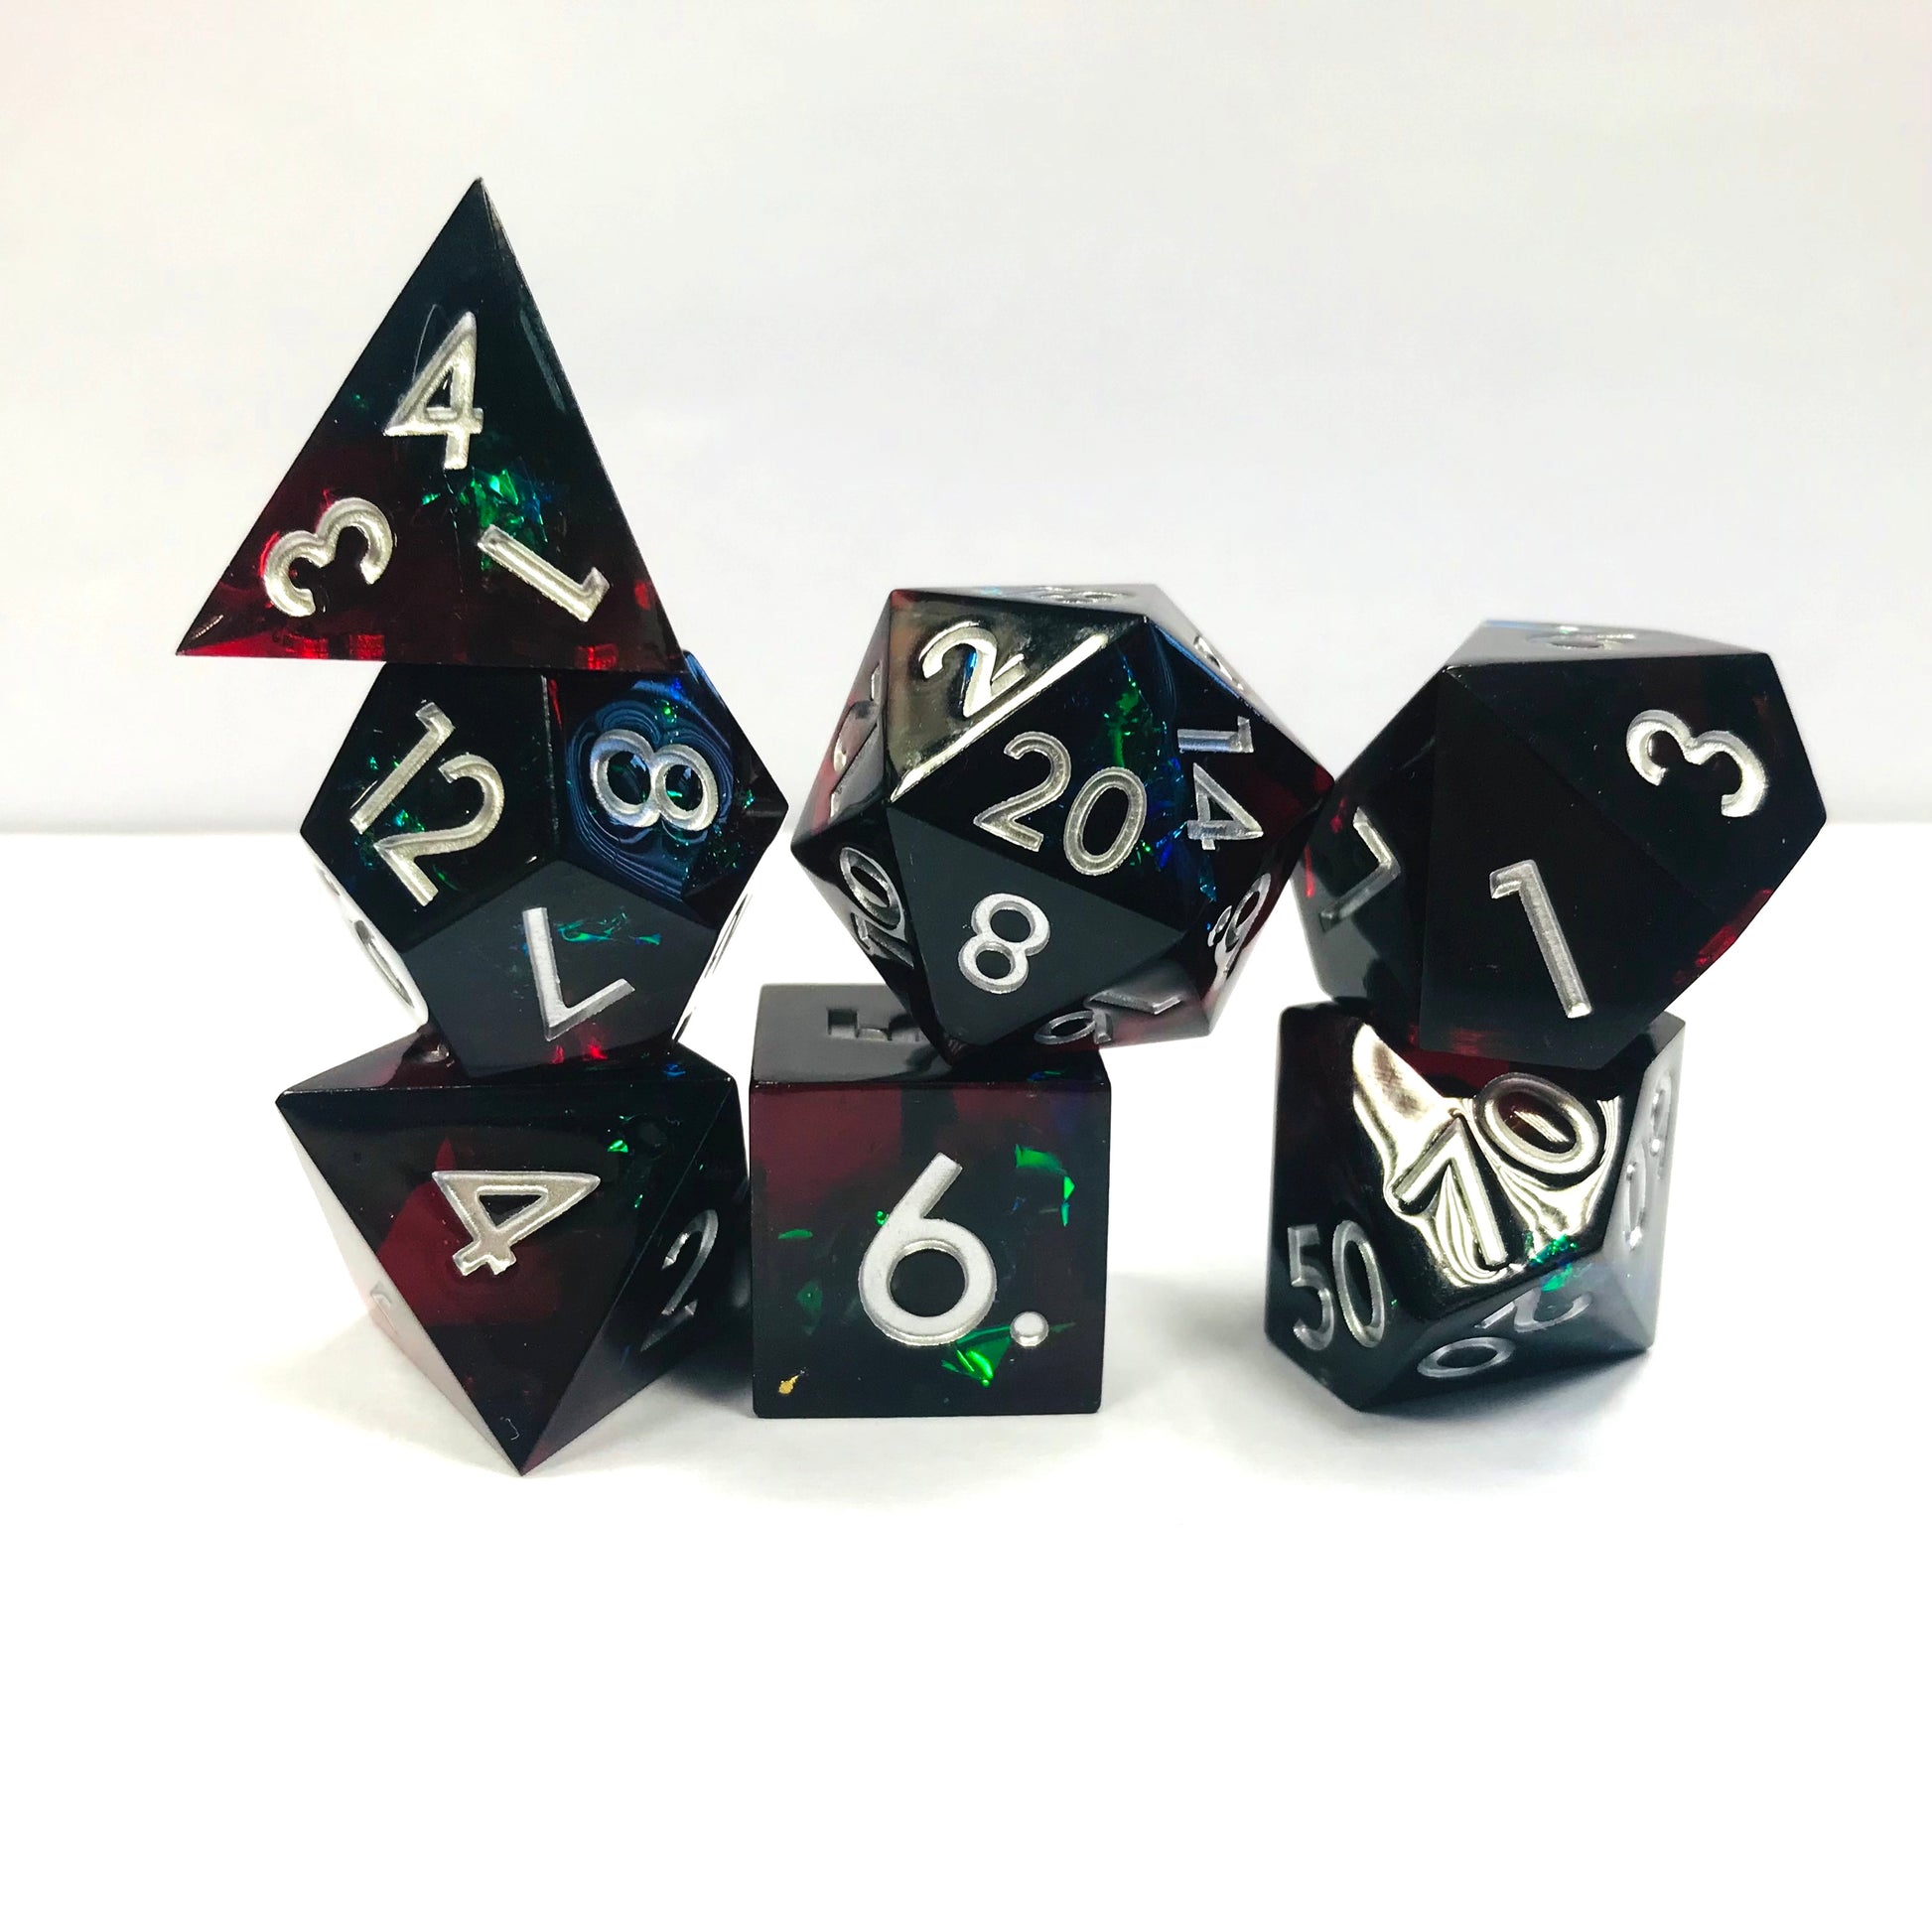 dnd sharp edge dice set for RPG role playing games, dice goblin, dice dragon and critical critter collectors